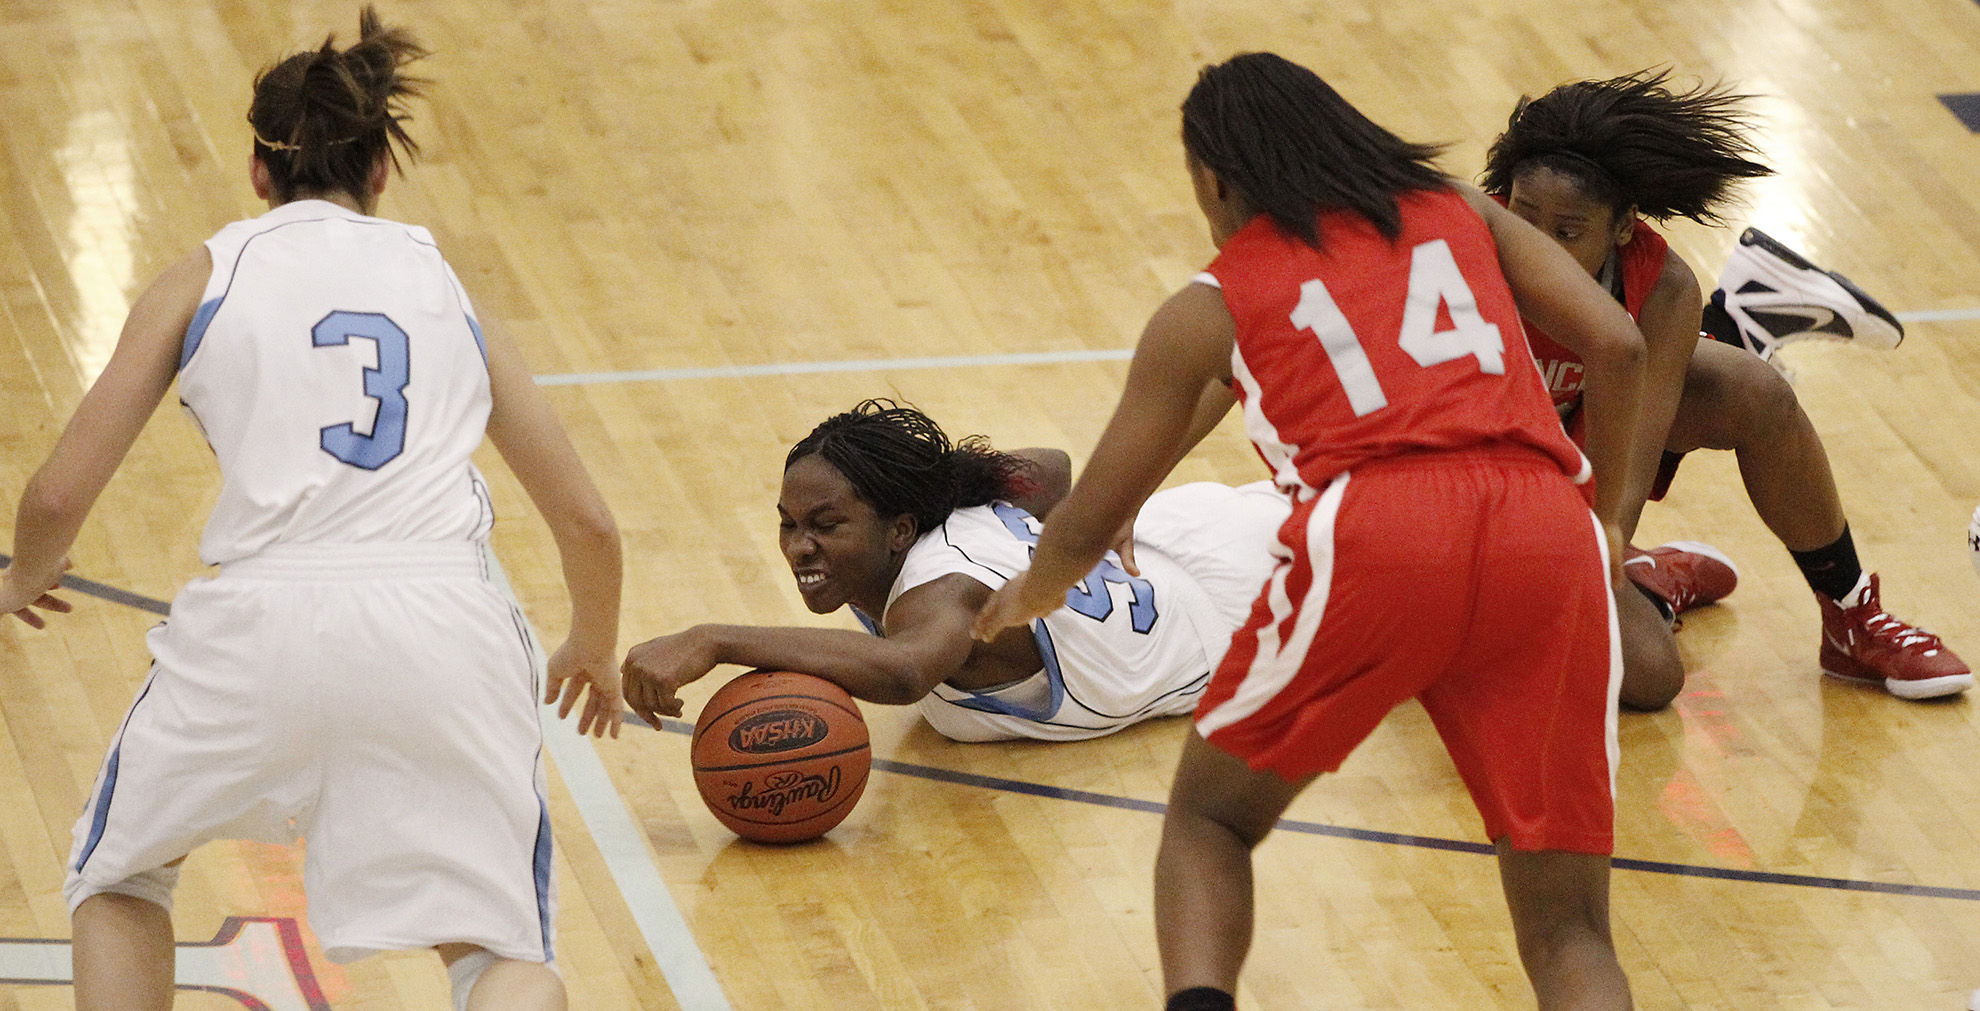 Women's Basketball action shot - one woman diving for the ball on the ground while others swarm around her